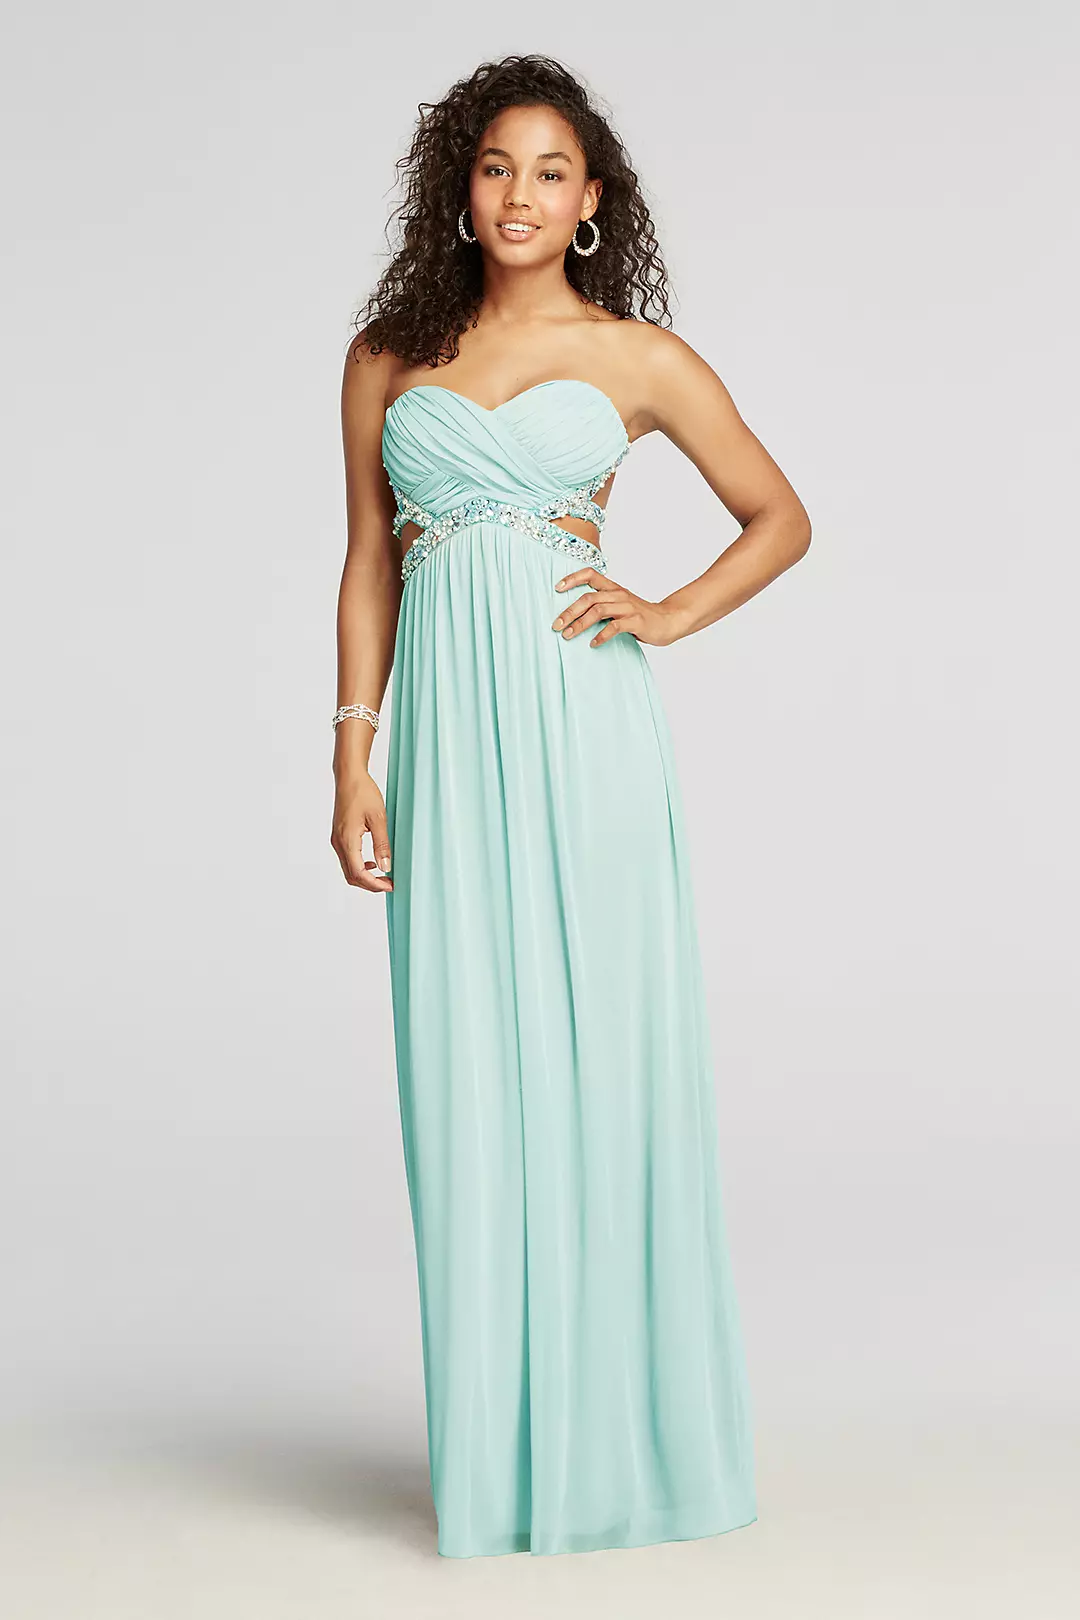 Strapless Crystal Beaded Cut Out Prom Dress Image